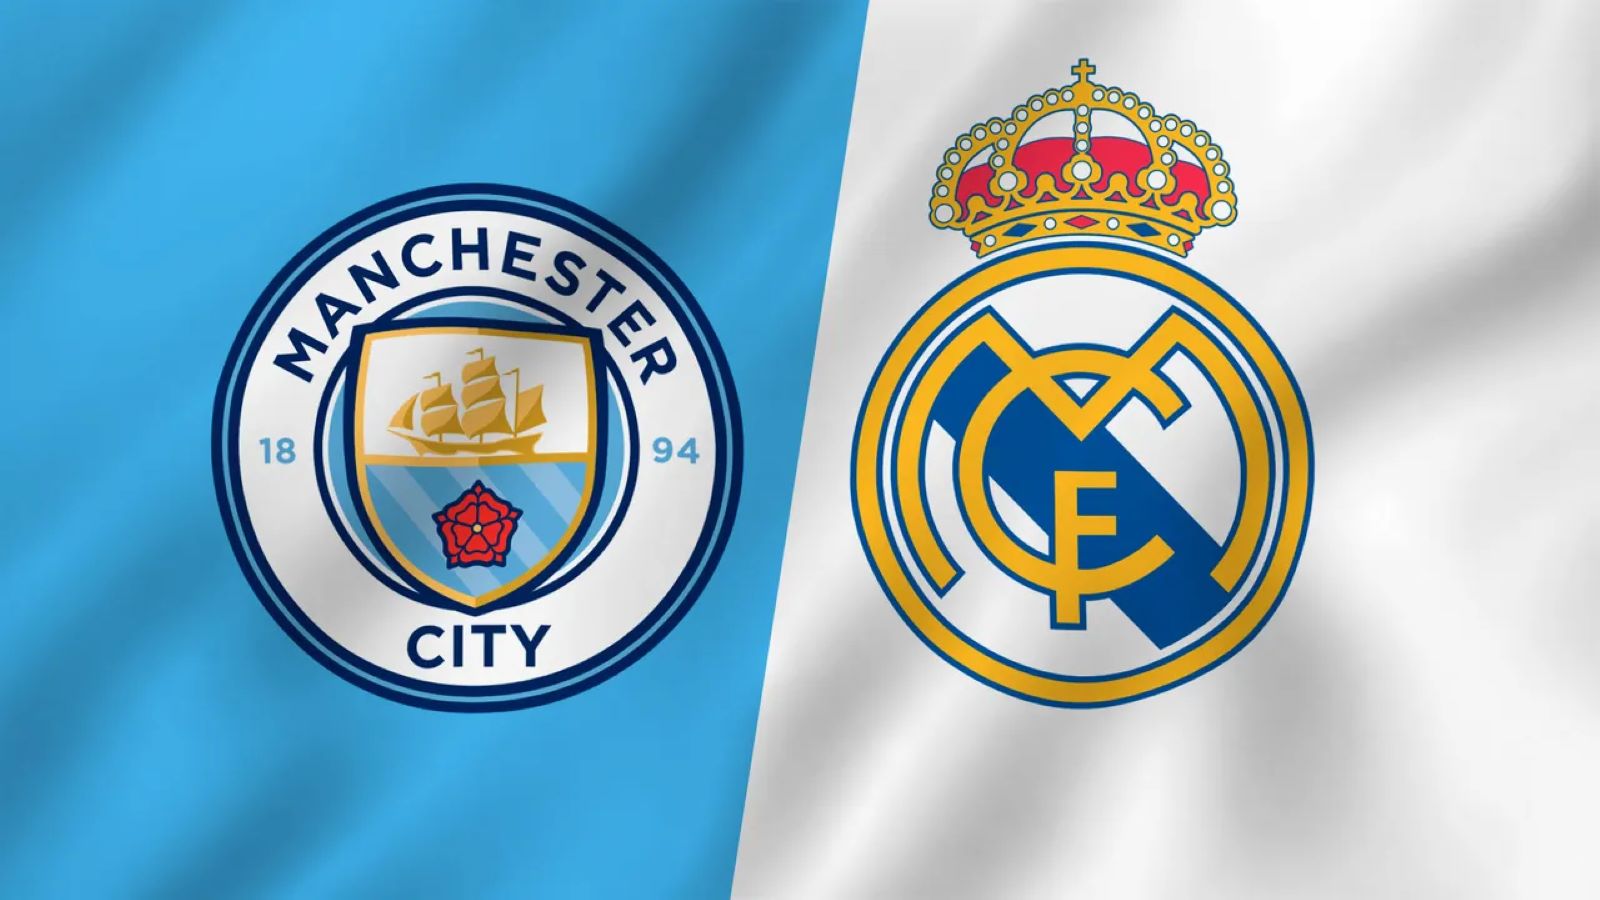 Manchester City-Real Madrid, tonight on Amazon Prime Video the semi-final of the UEFA Champions League